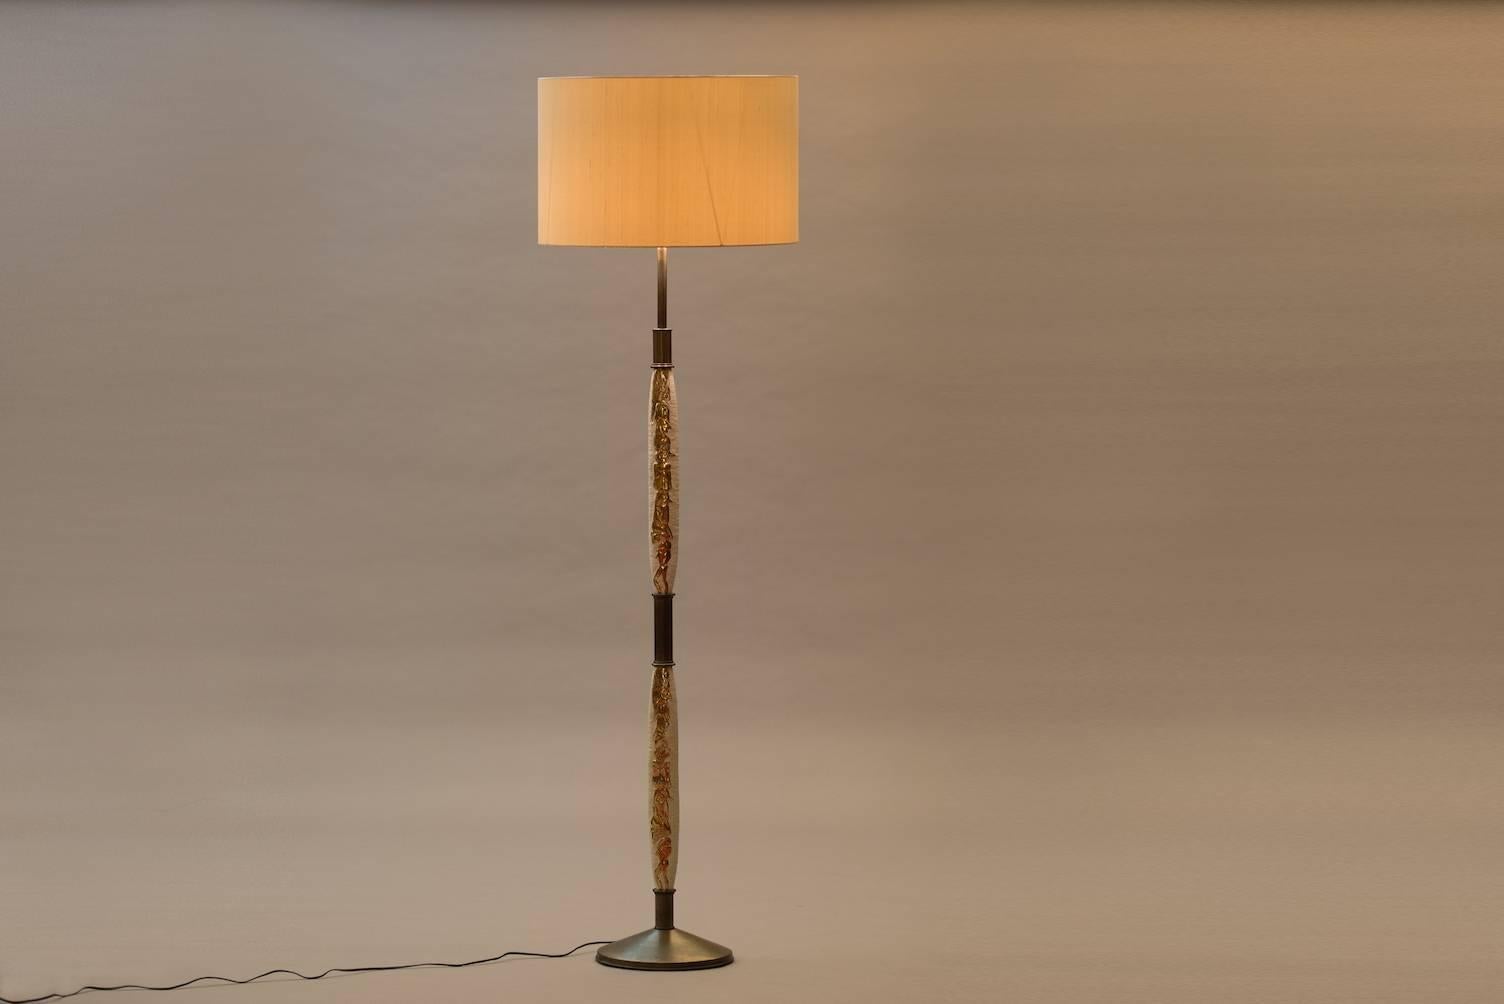 Floor lamp with Egyptian inspired ceramic motifs, brass and a new silk shade.
Measures: Diameter 55 cm (shade).